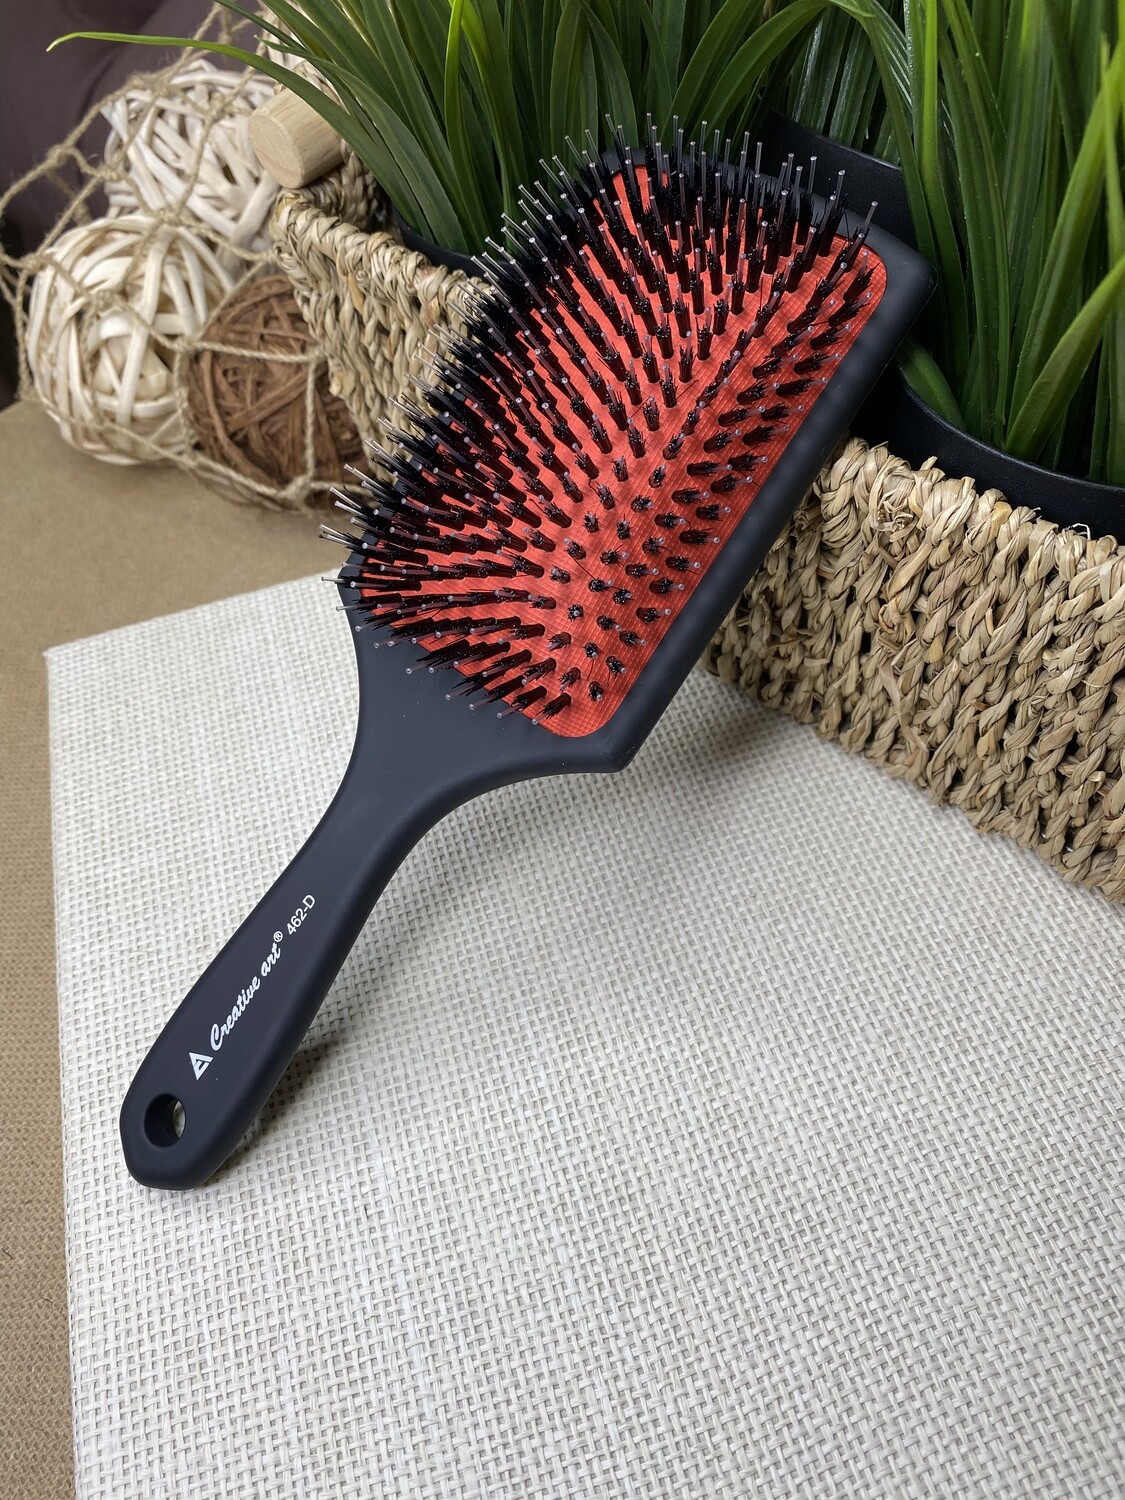 #Large Comb For Extended Hair